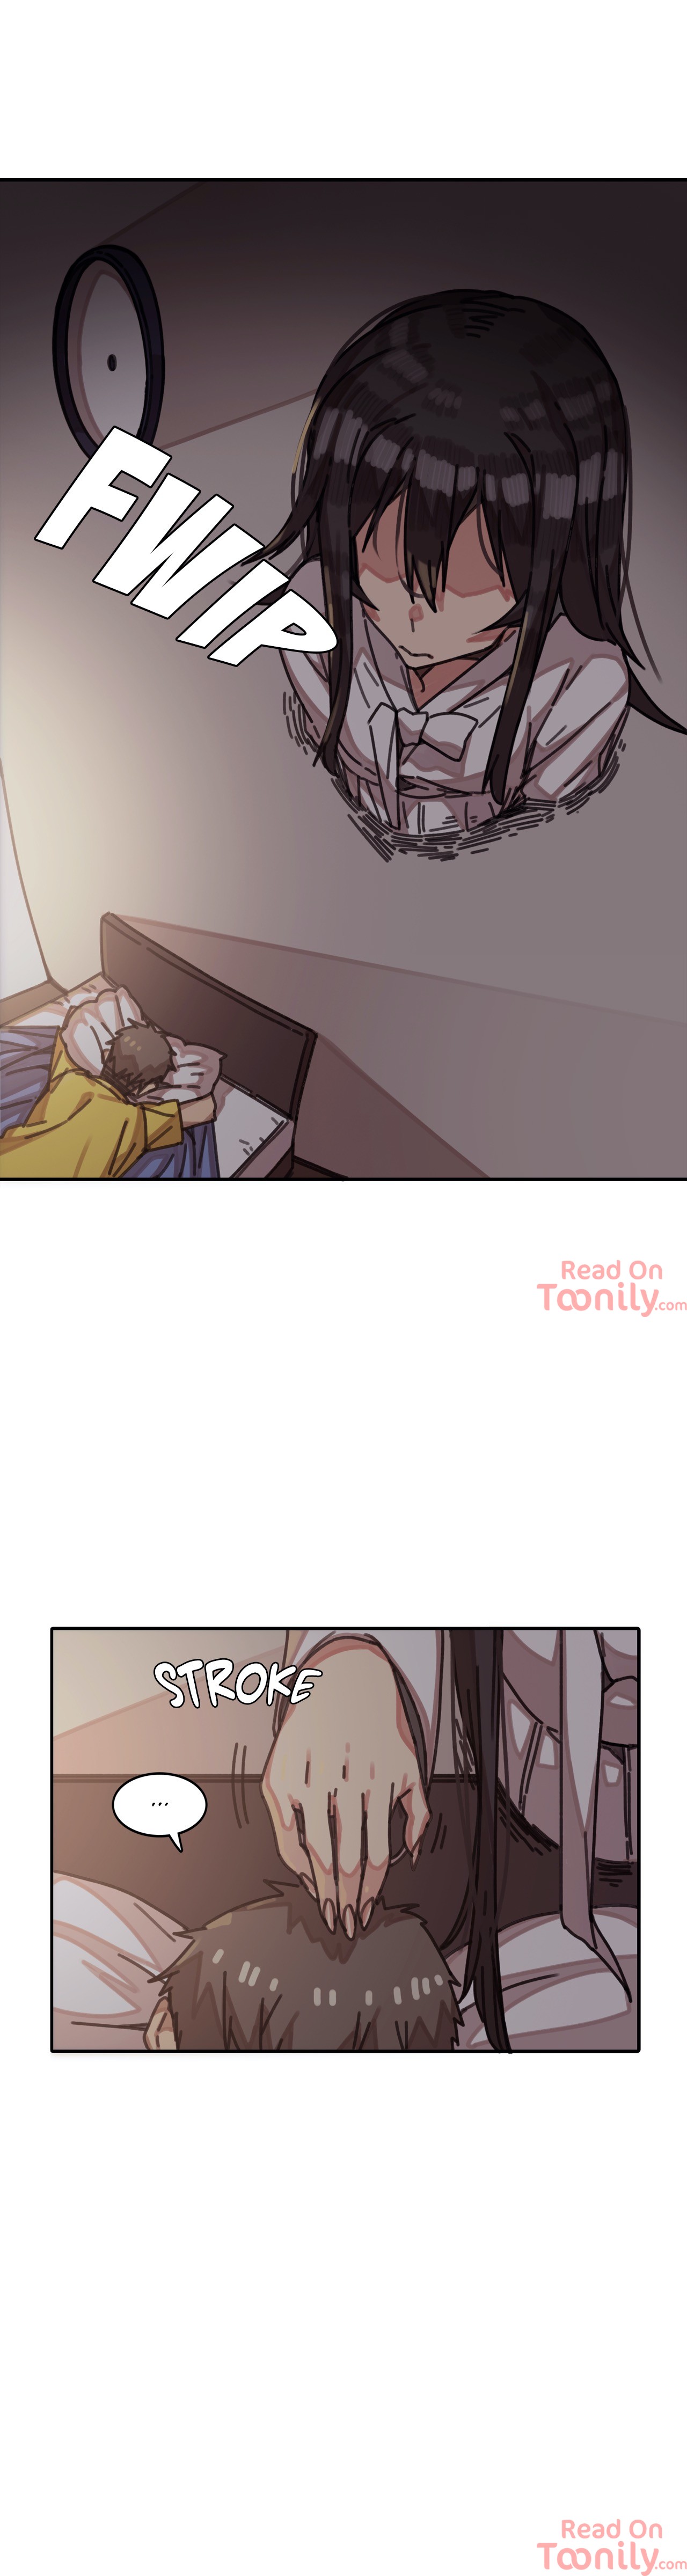 The Girl That Lingers in the Wall - Chapter 1 Page 14